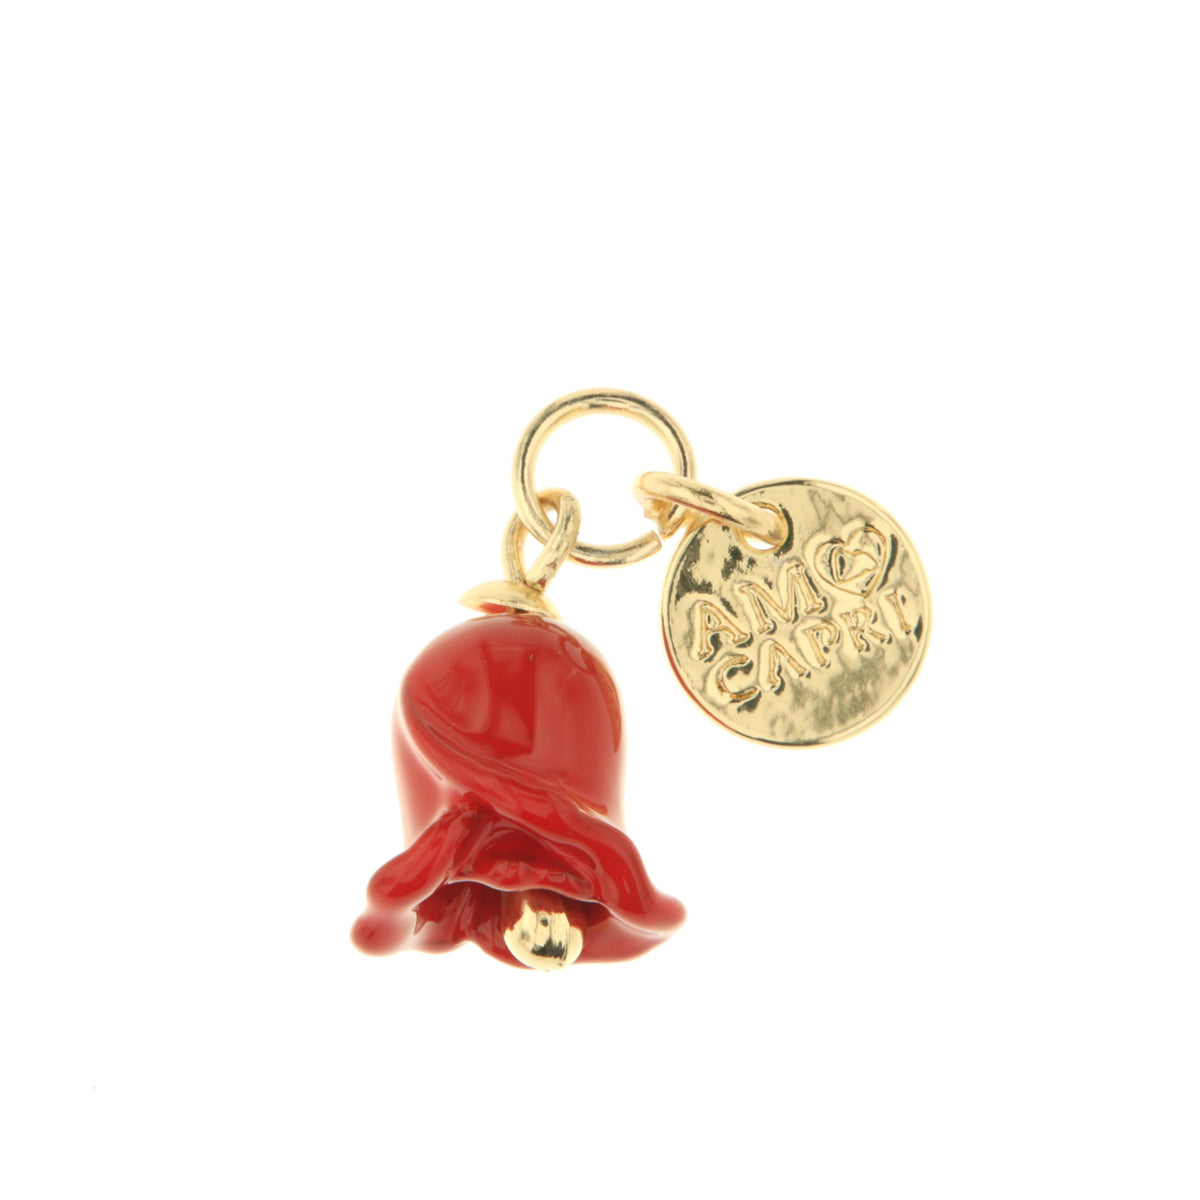 Metal pendant in the shaped rose -shaped bell embellished with colored glazes